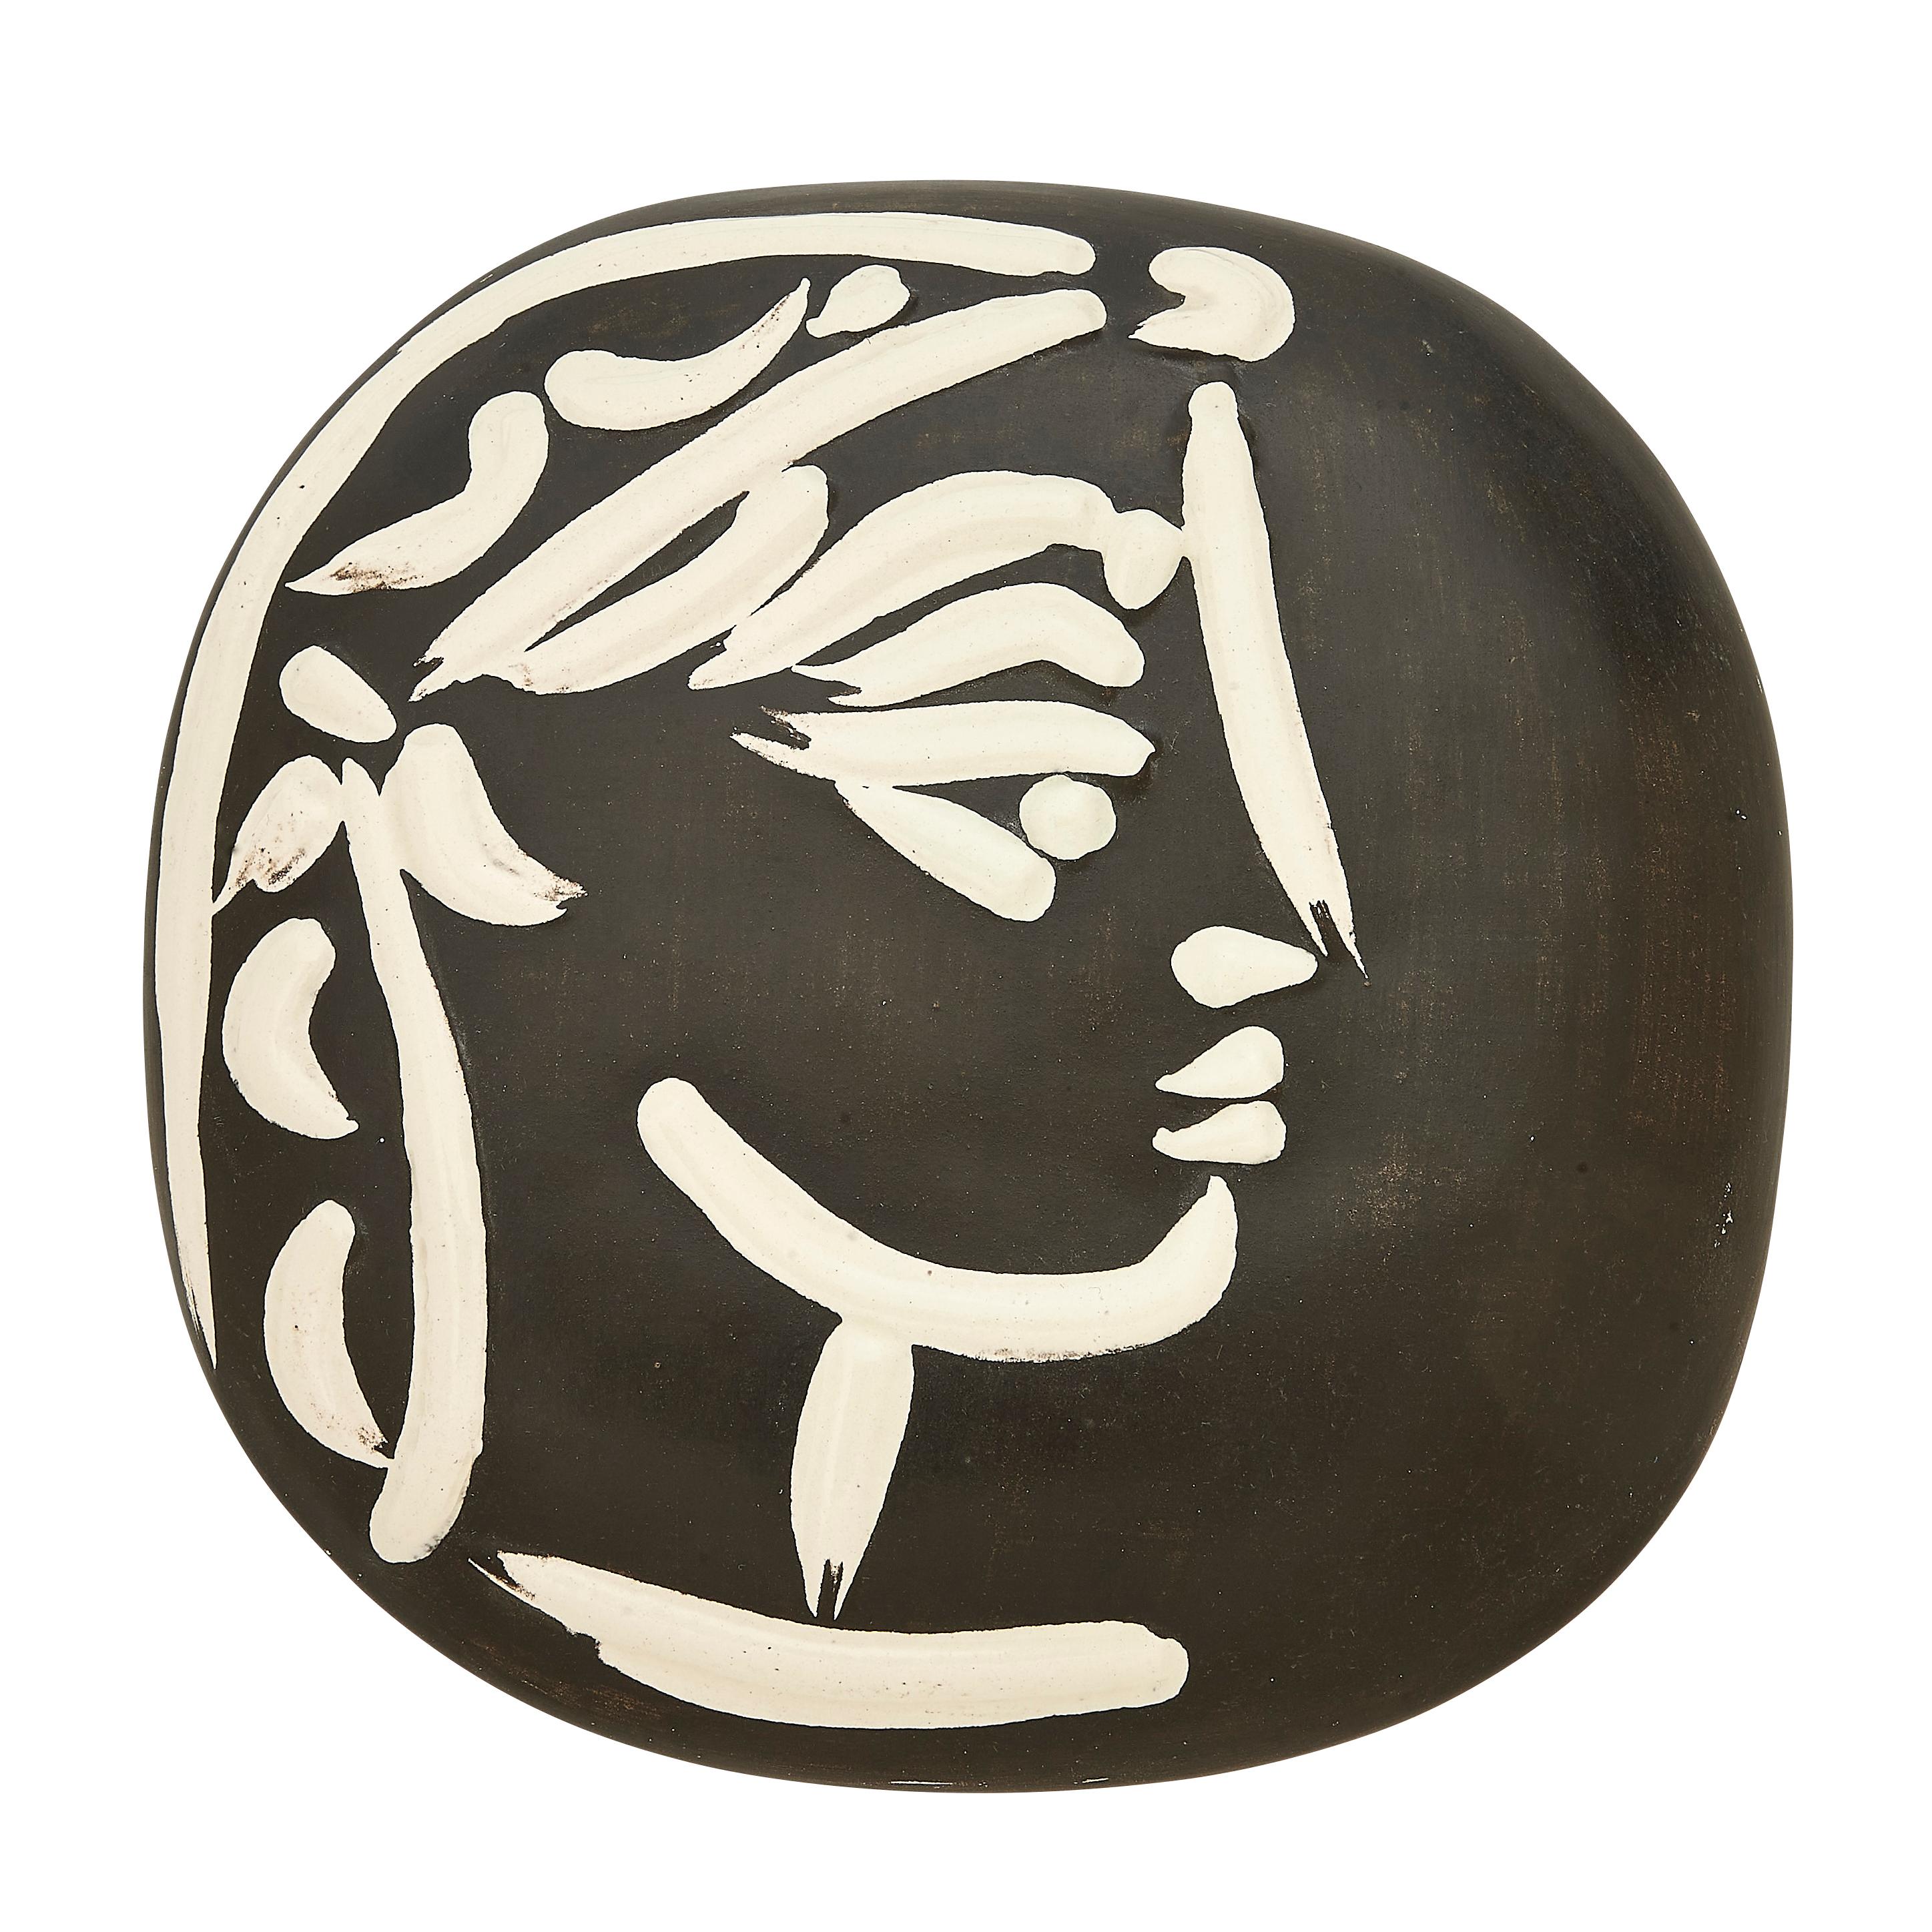 PABLO PICASSO (1881-1973) 
Jacqueline's profile (A. R. 385)

Terre de faïence plaque, 1956, from the edition of 500, partially glazed and painted, with the Empreinte Originale de Picasso and Madoura stamps.